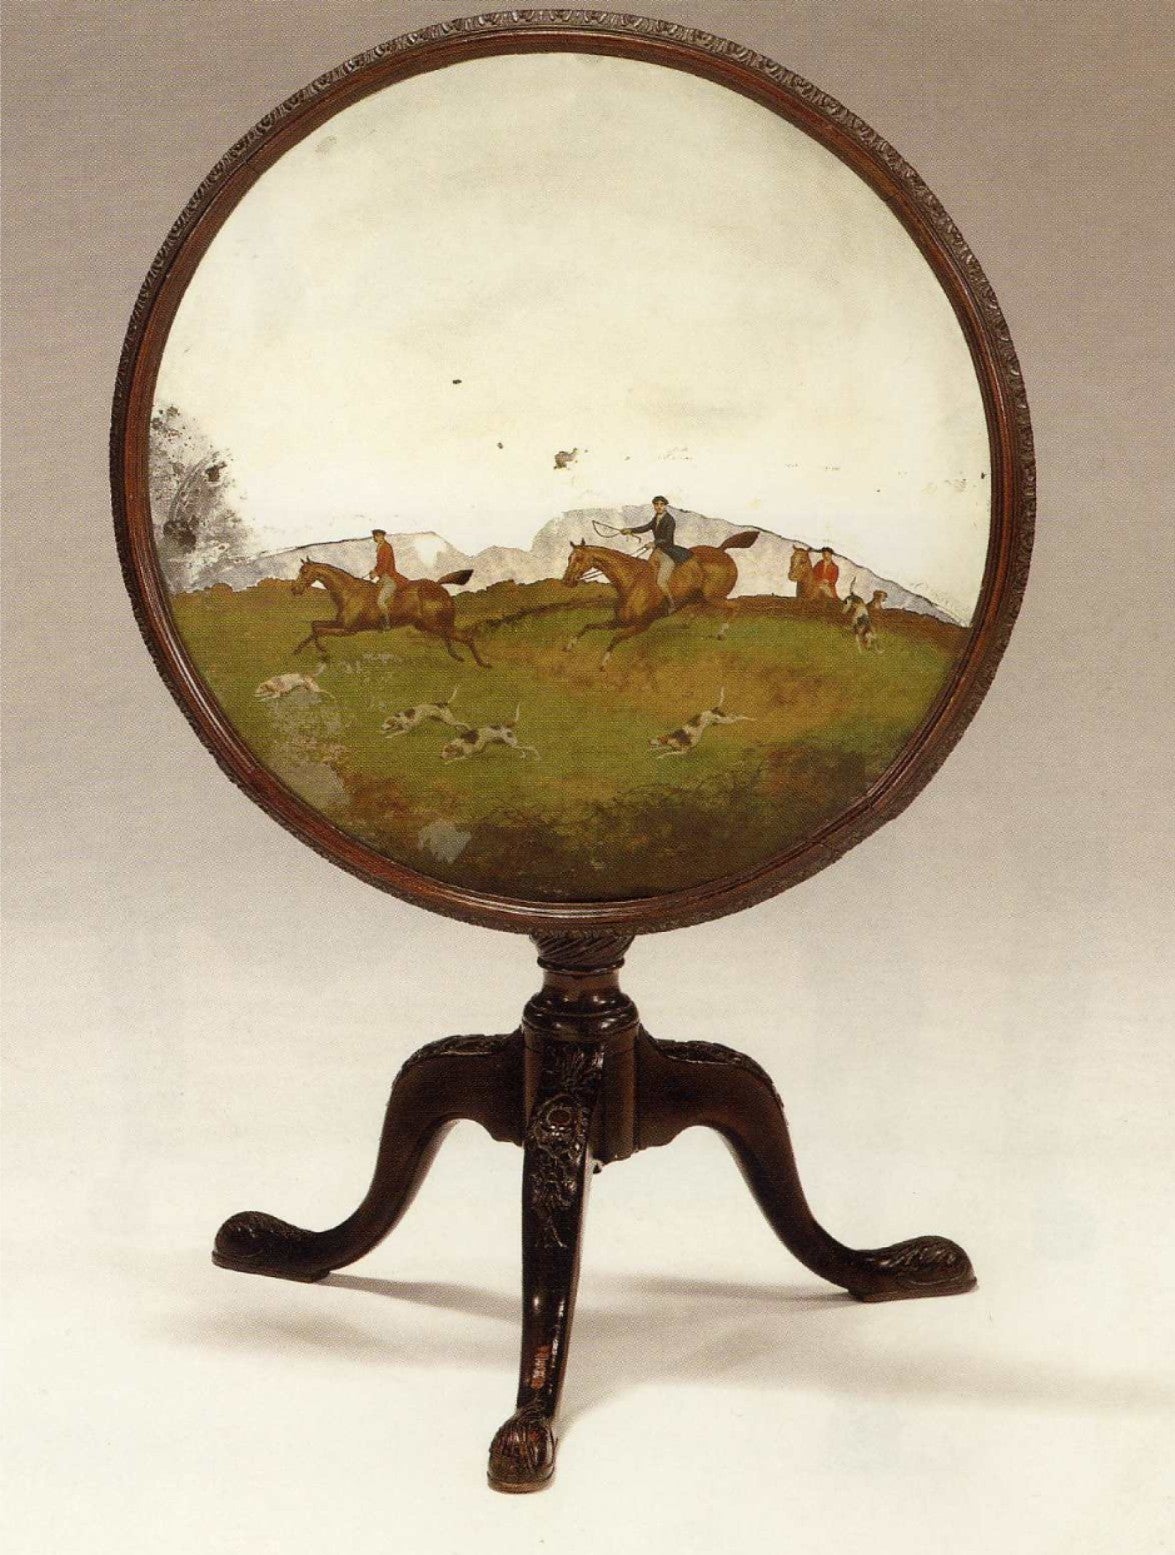 Rare mahogany 19th century tripod table with reverse painted glass top. The circular top with foliated carved edge centered by a panel of reverse painted mirror glass depicting a scene from a fox hunt. The carved tripod base with vase shaped stem